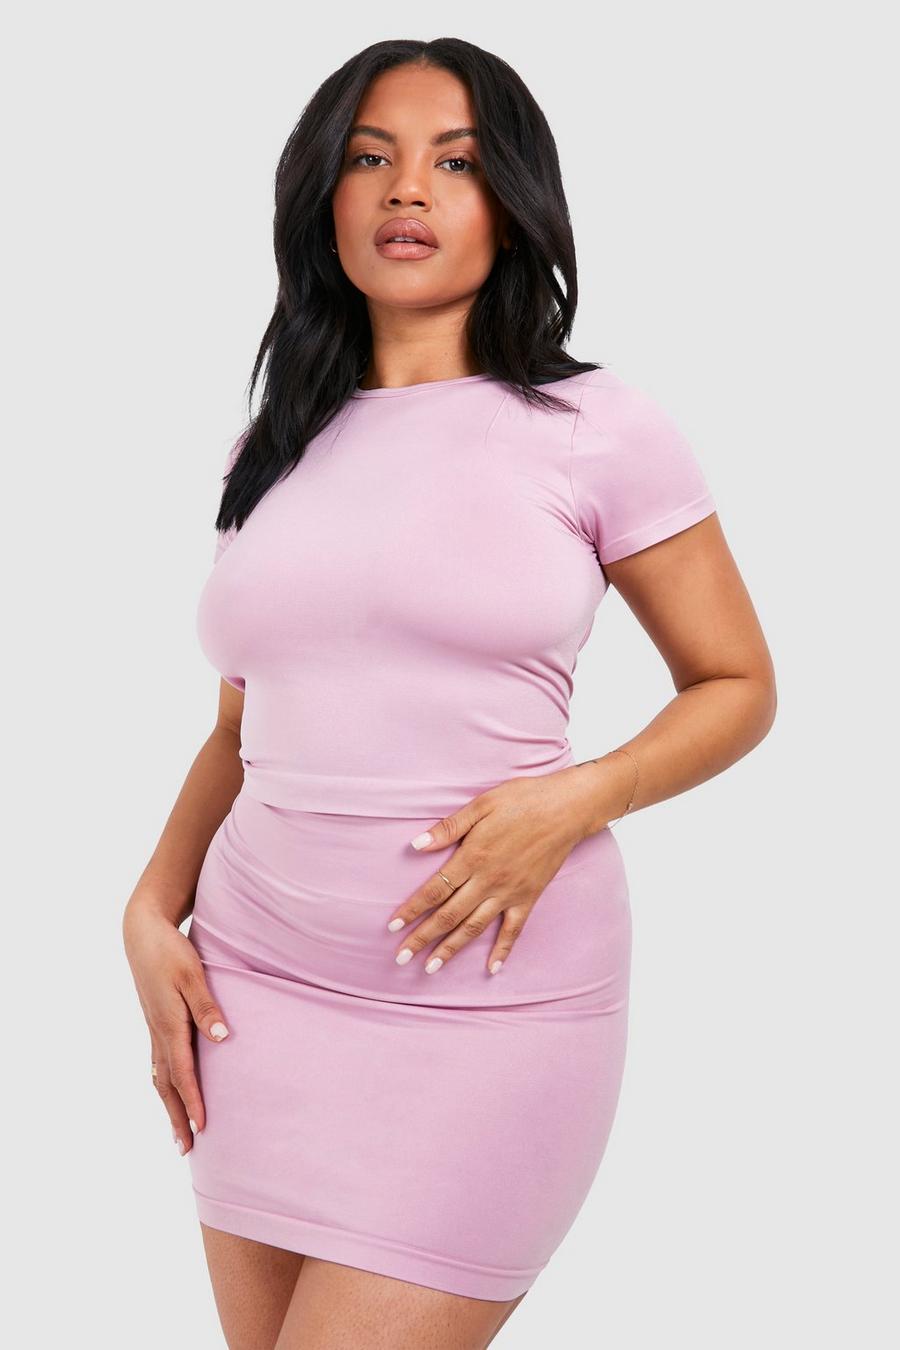 Grande taille - Top premium sans coutures, Pink image number 1